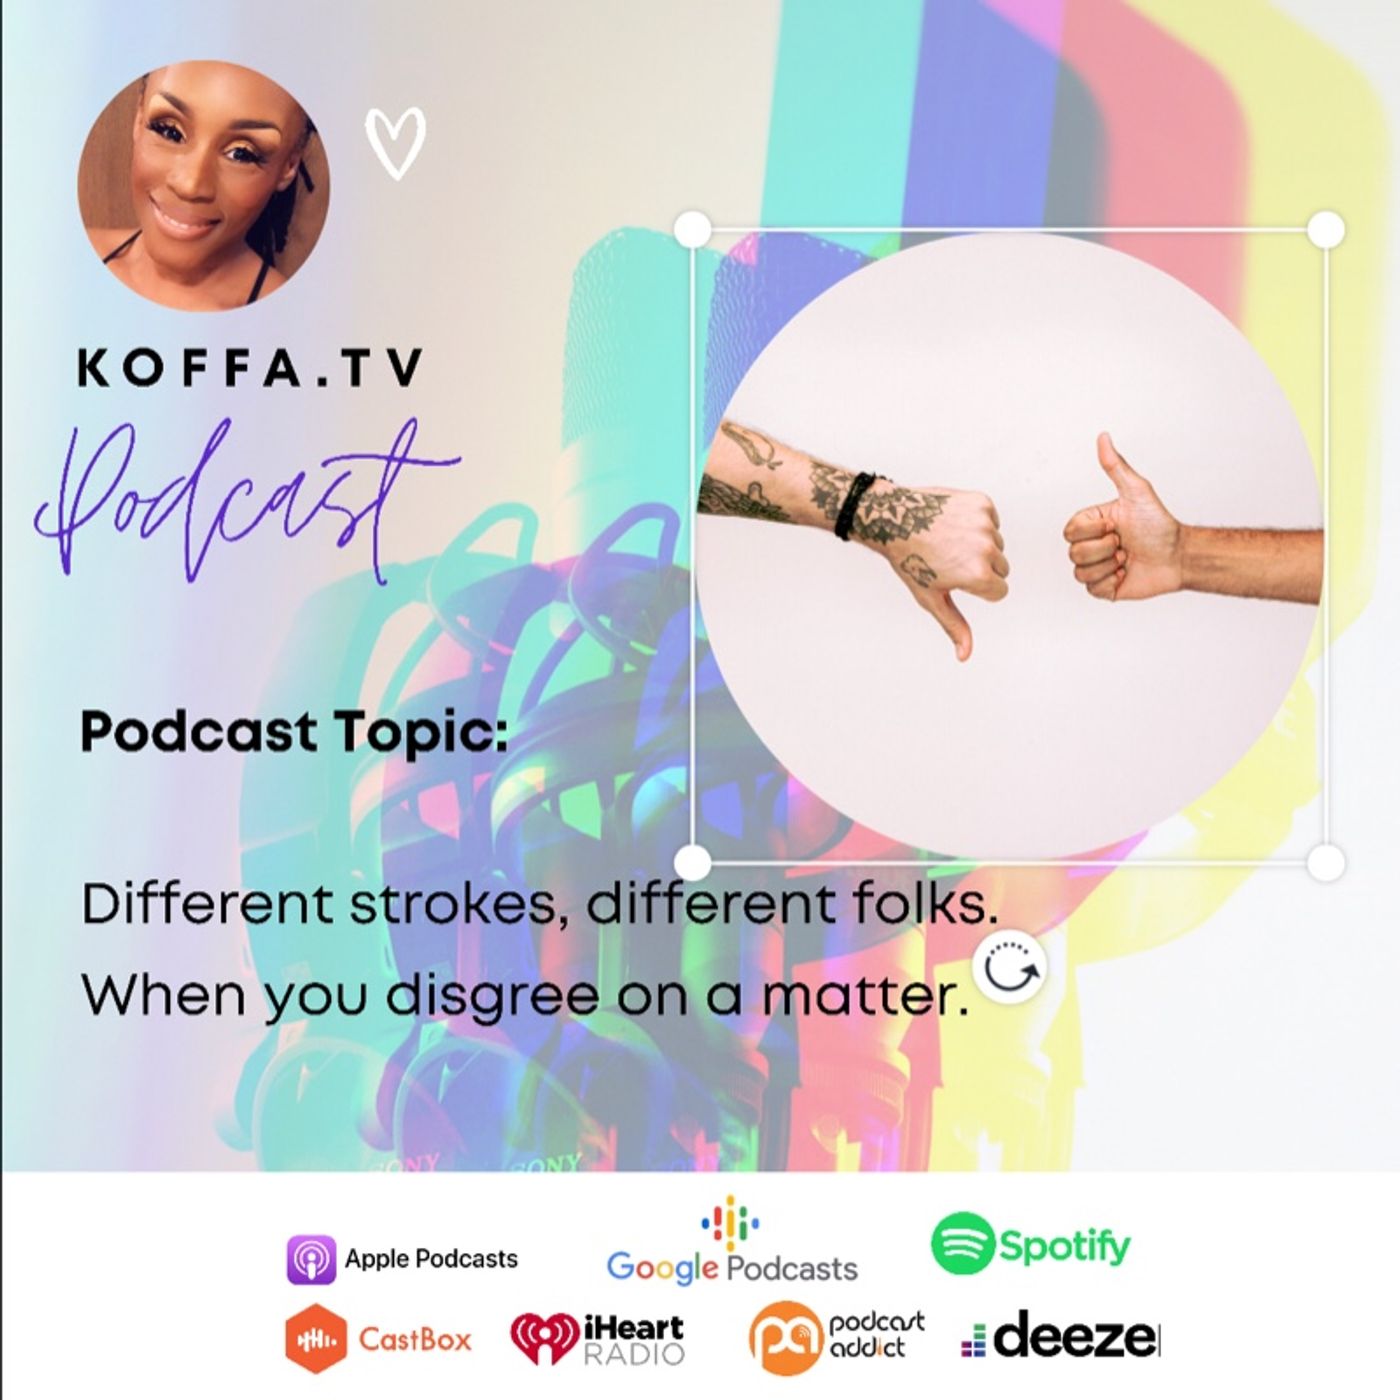 Episode 26 - KOFFATV Podcast | Different strokes, different folks.  When you disgree on a matter.